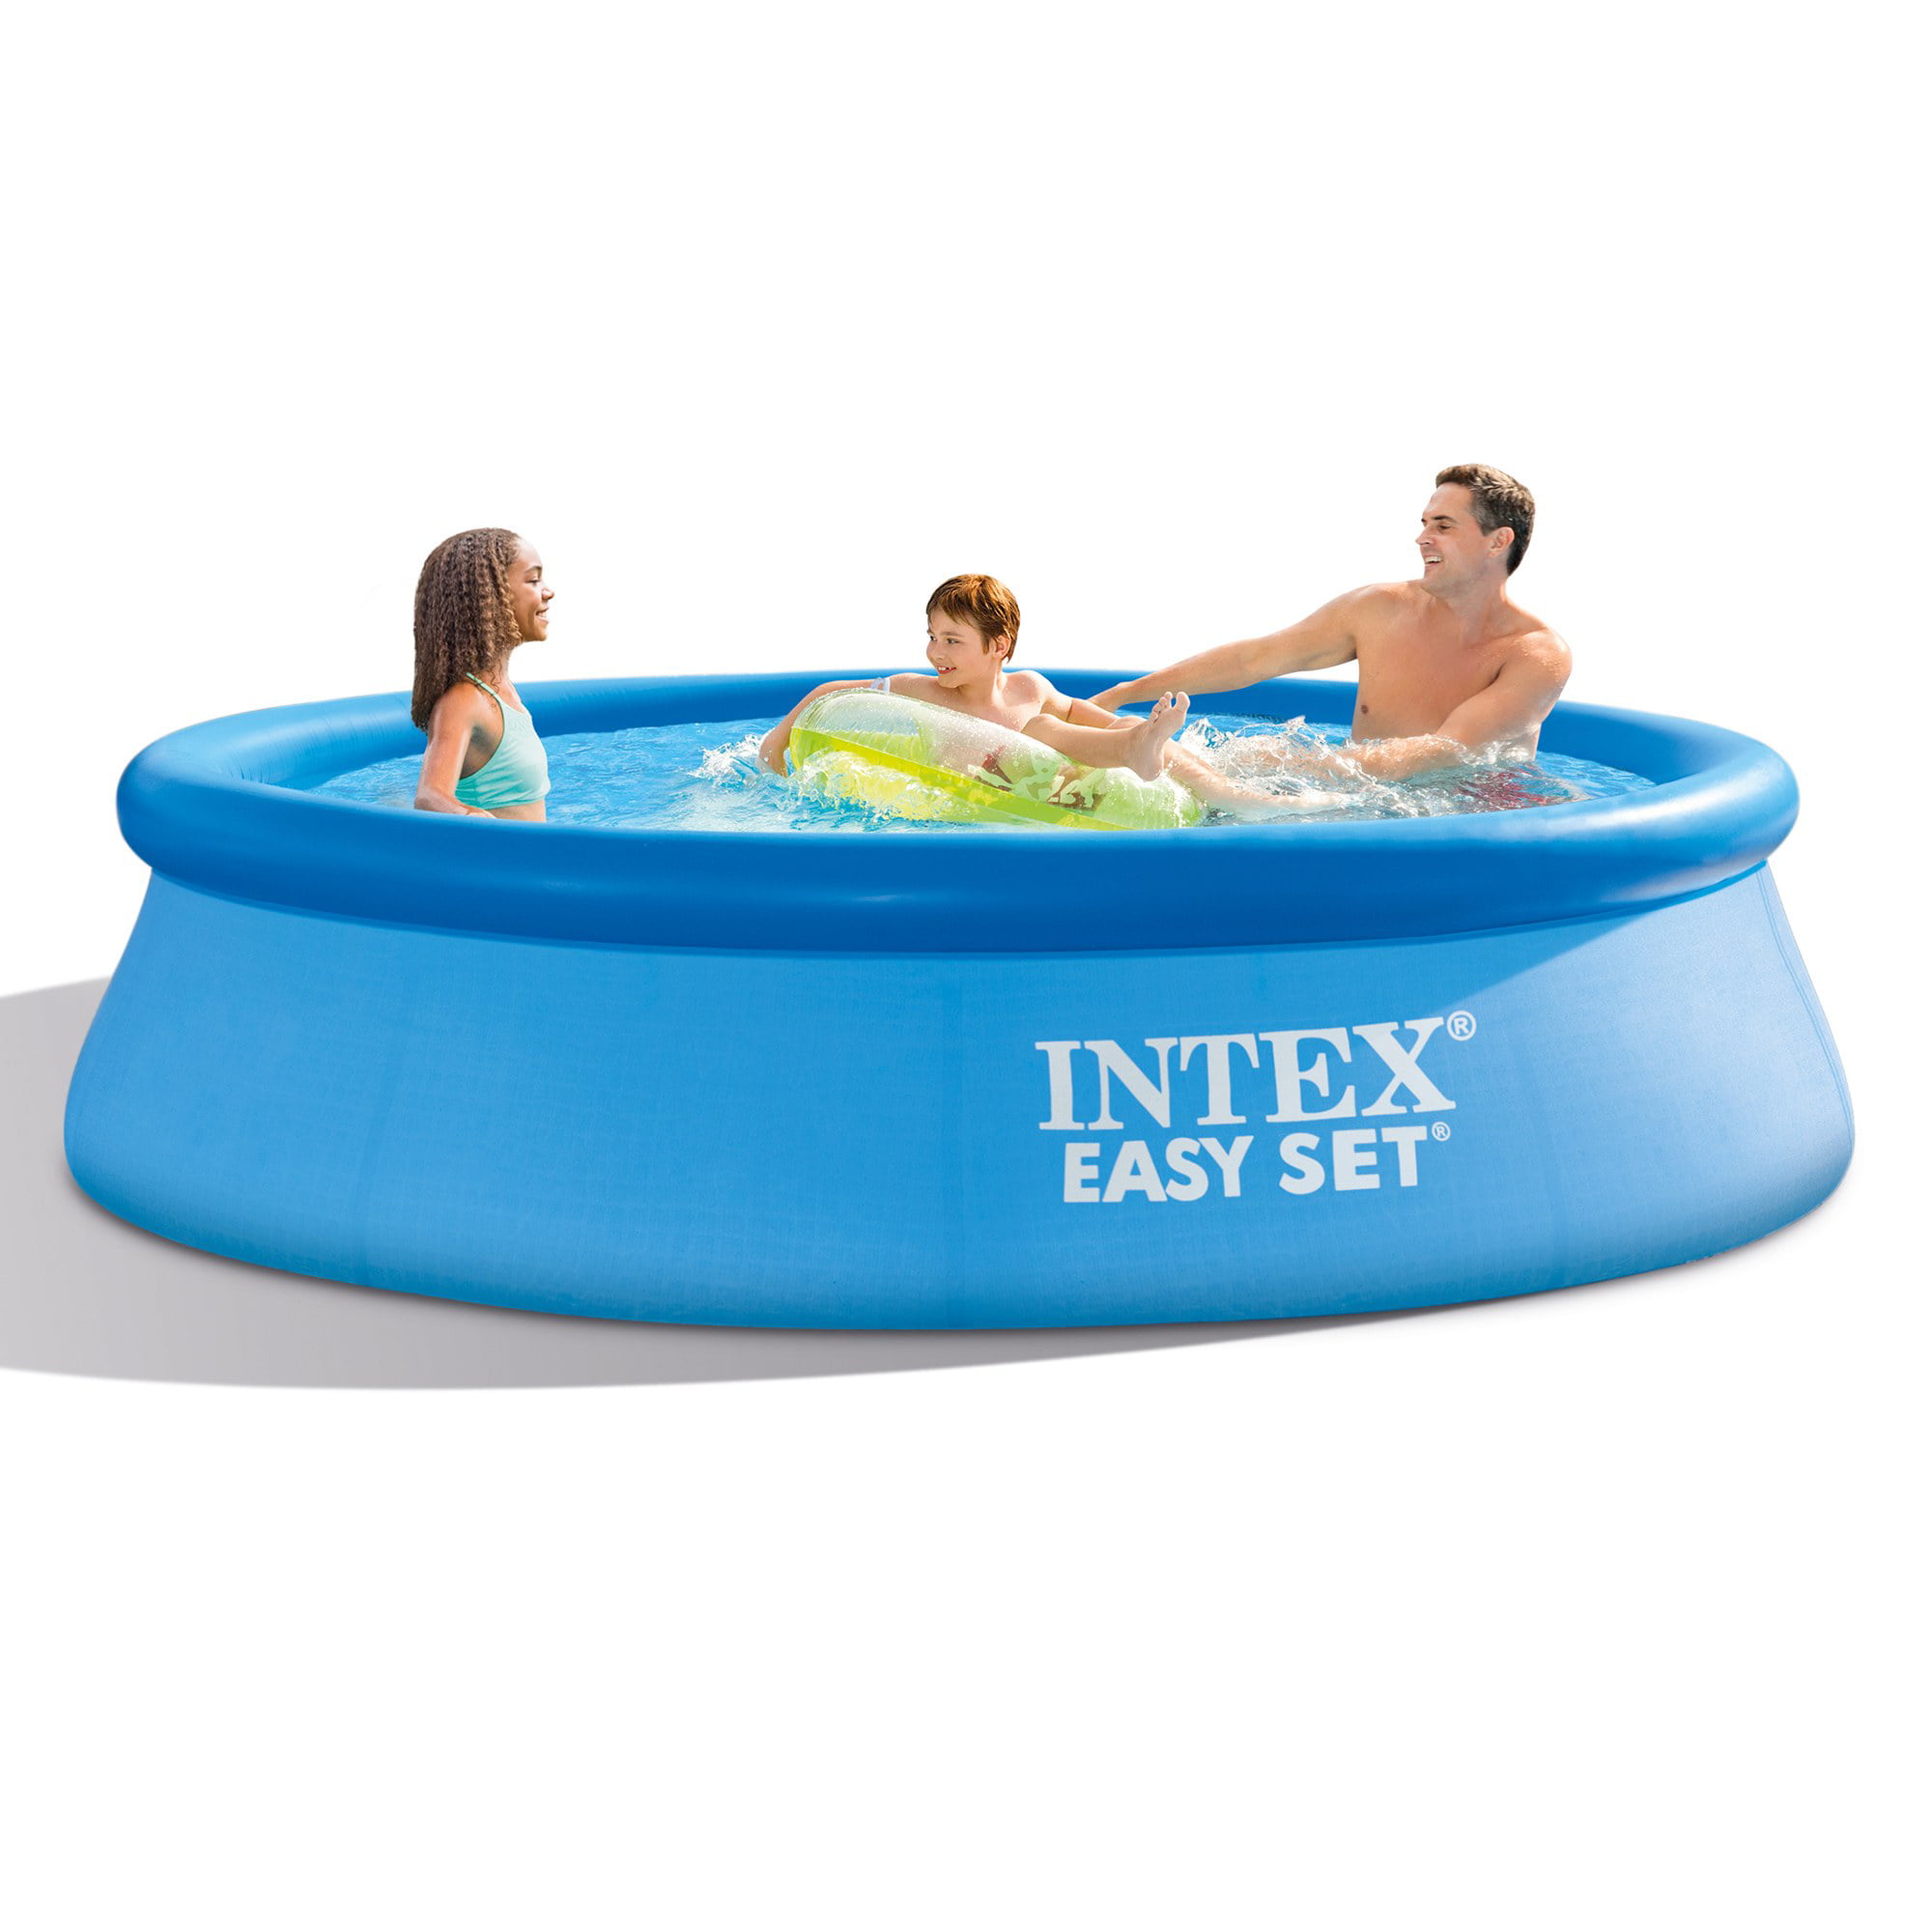 excentrisk skadedyr midt i intetsteds Intex: Easy Set 10' x 30" Inflatable Pool W/ Filter Pump - (28121EH) -  Includes Pump Filter, Hydro Aeration Technology, Outdoor/Backyard Family  Pool, Suitable For Ages 6+ - Walmart.com